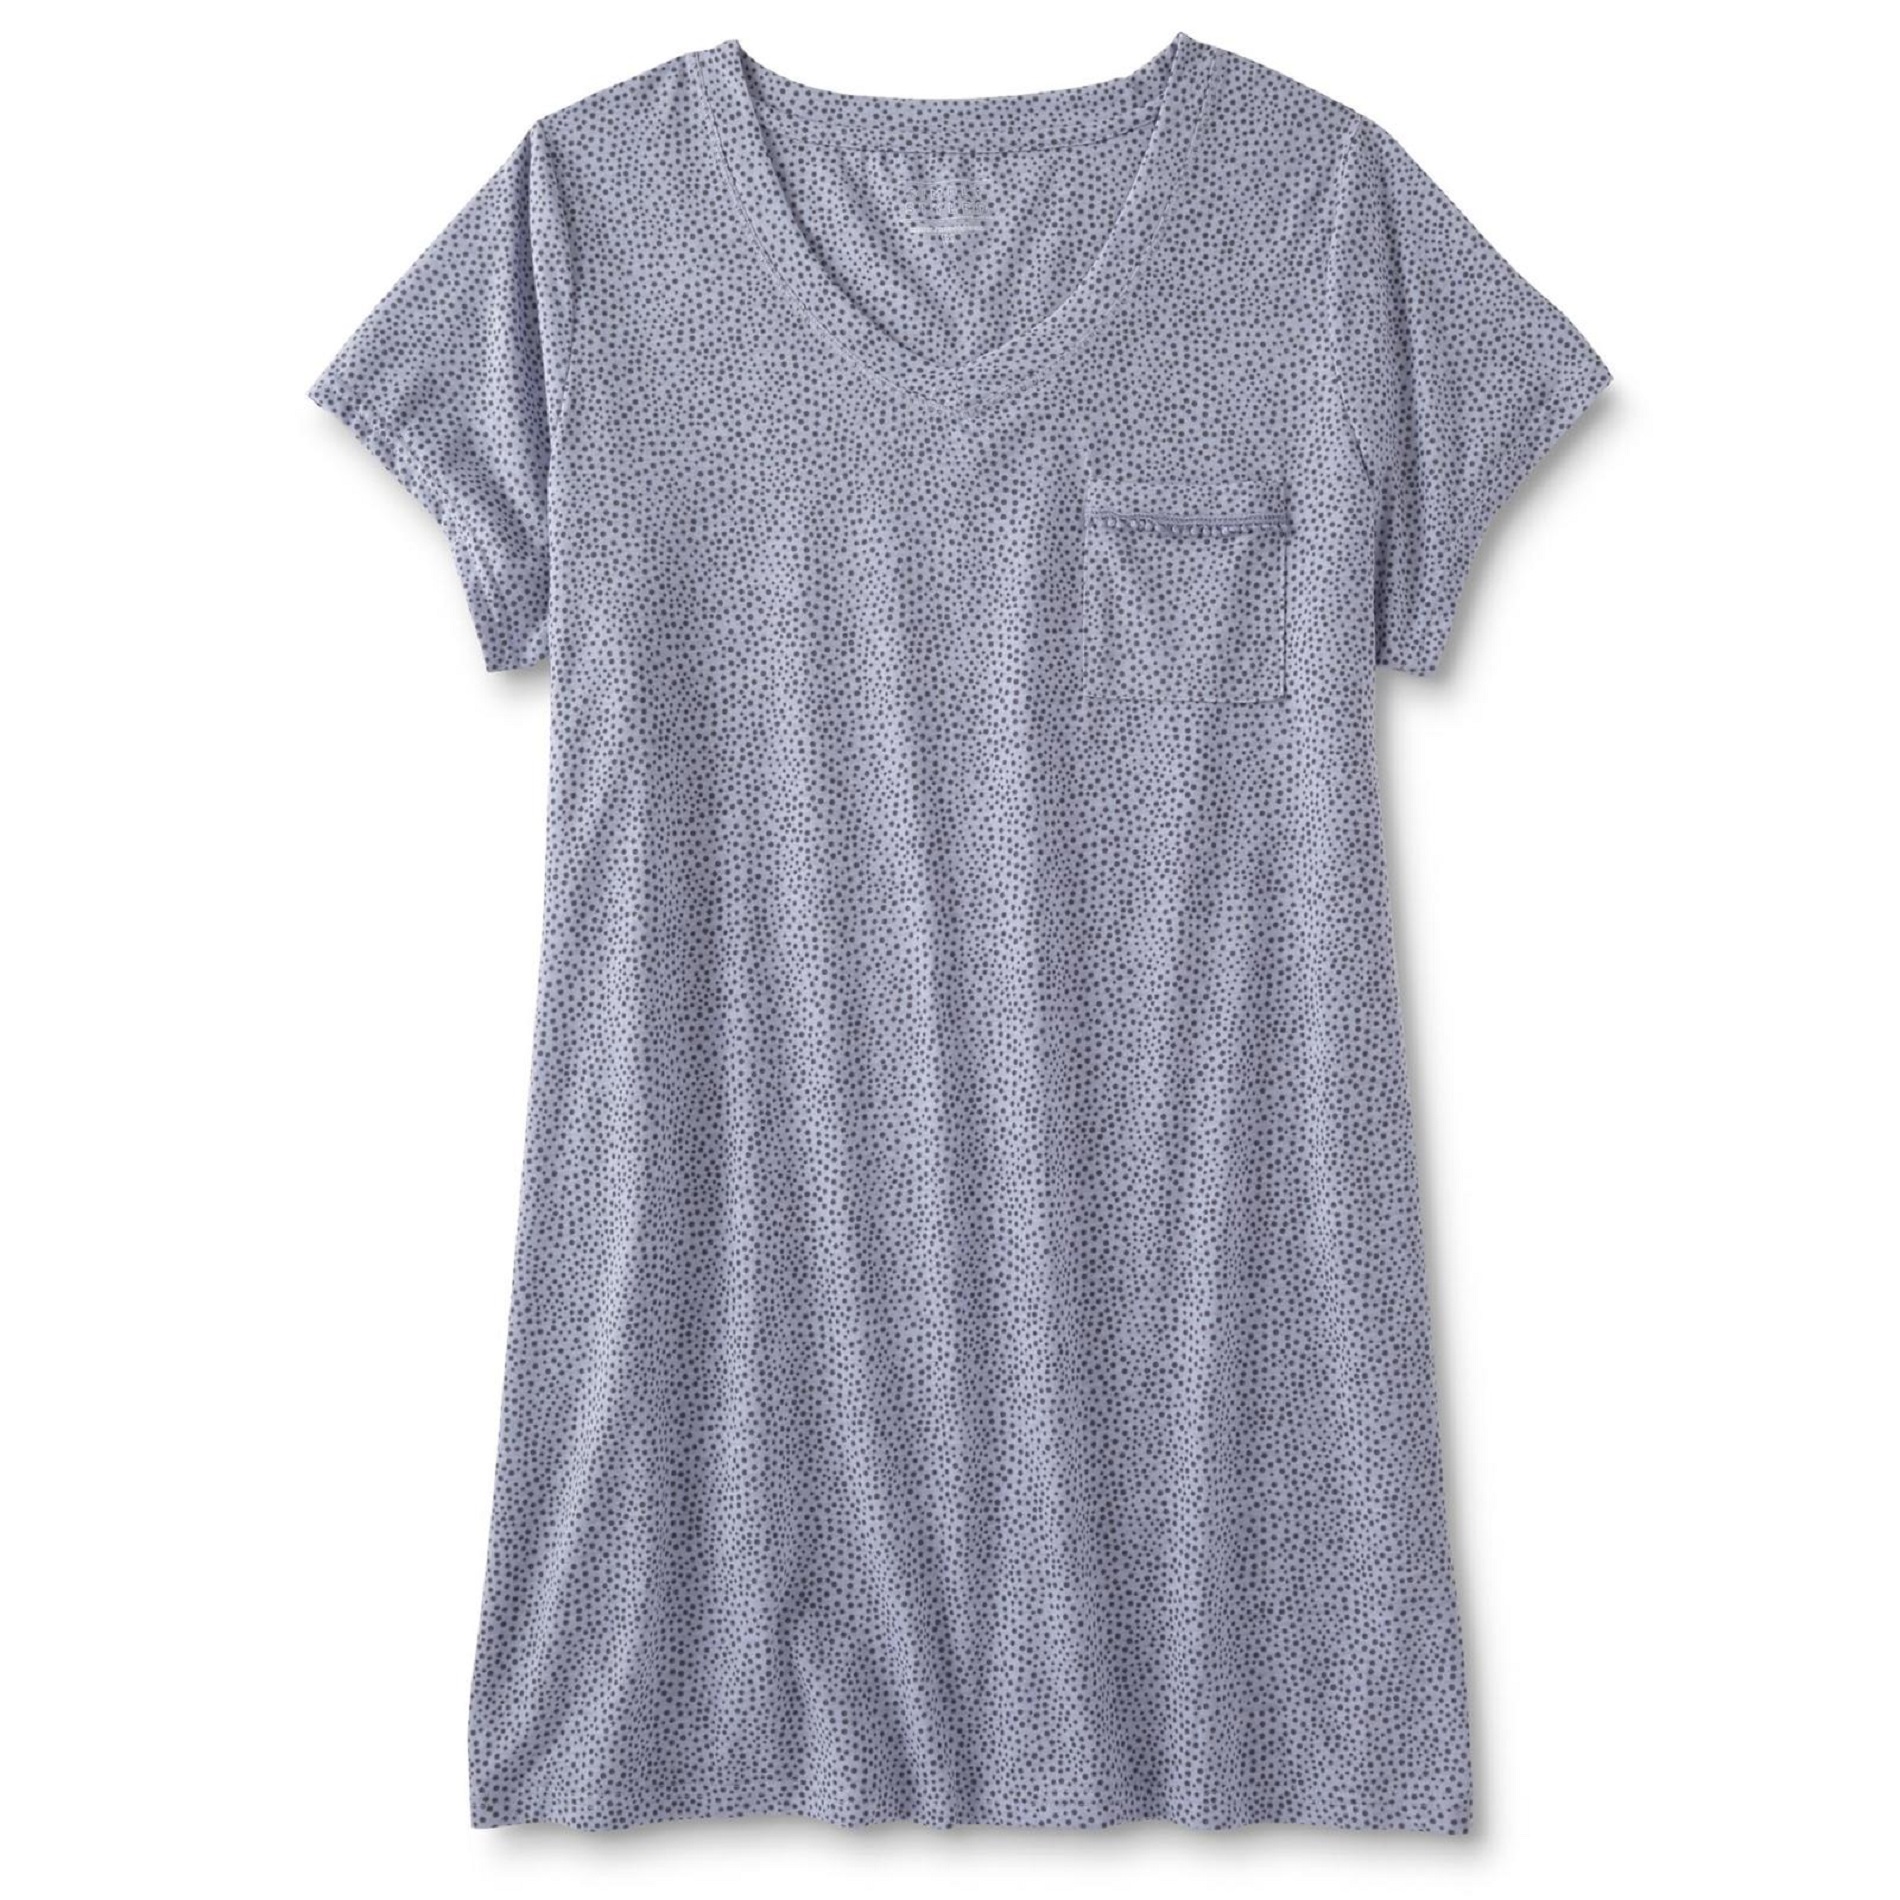 Simply Styled Women's Plus Nightgown - Dots